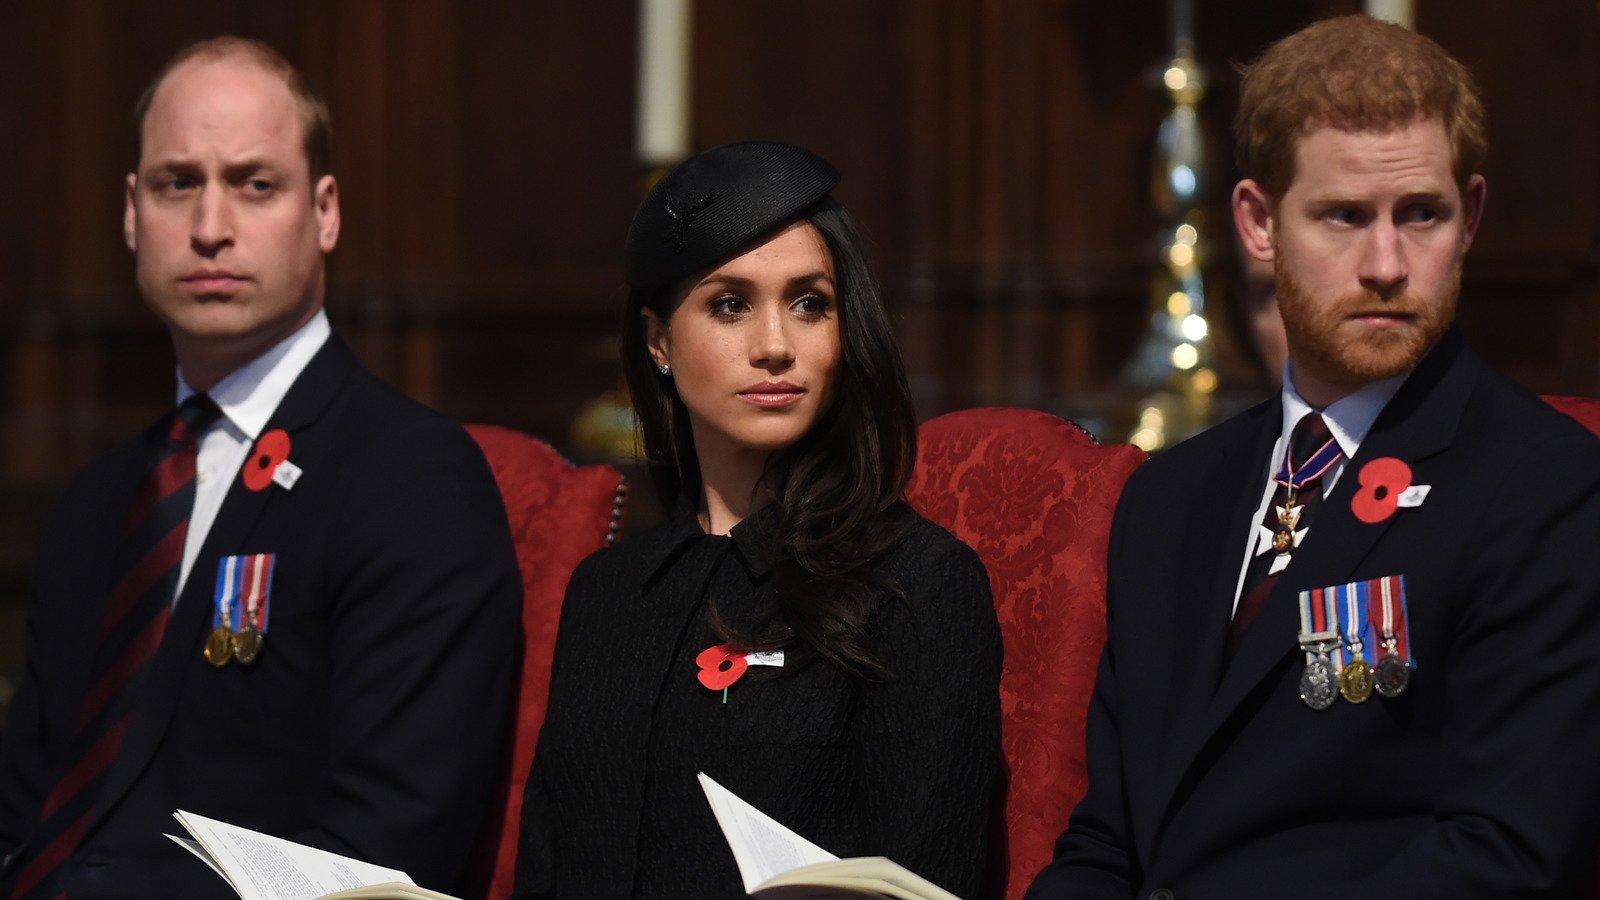 The Many Times Prince William Has Been Frustrated With Meghan Markle